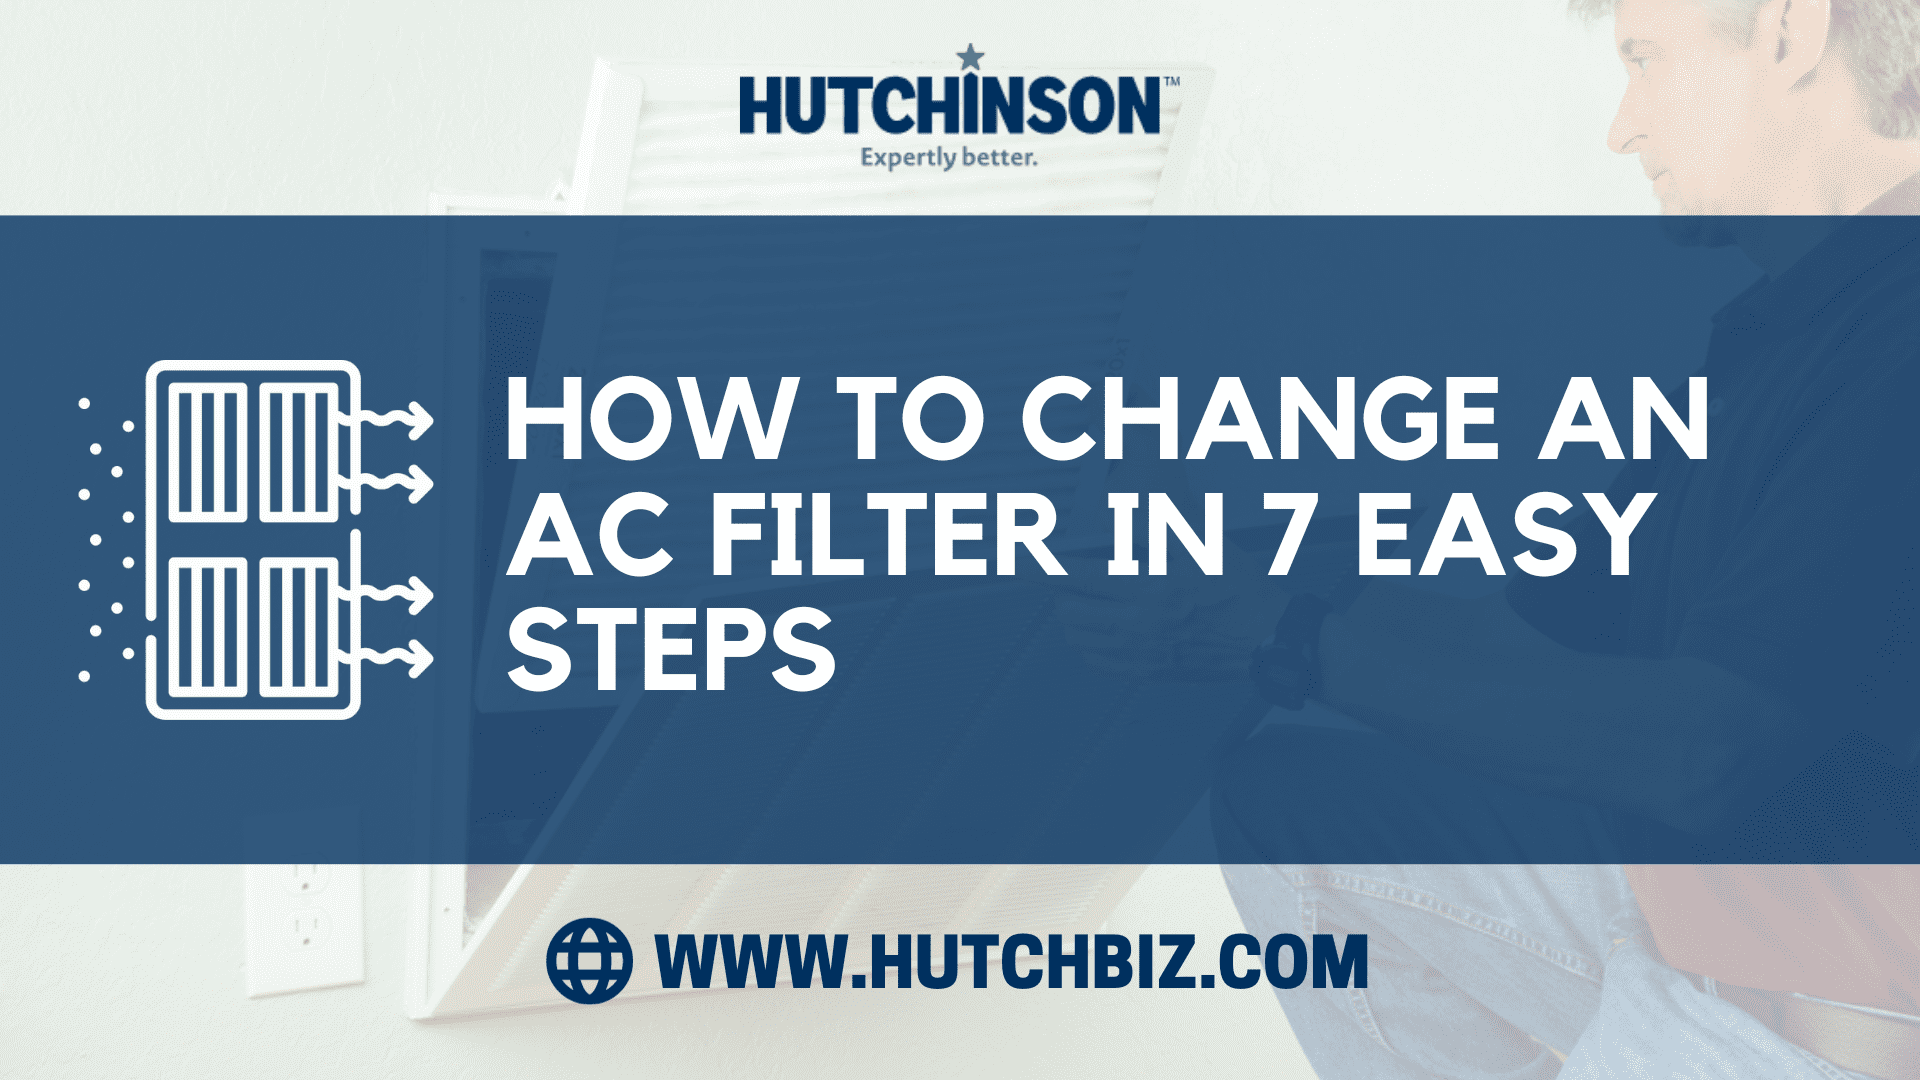 How to Change an AC Filter in 7 Easy Steps